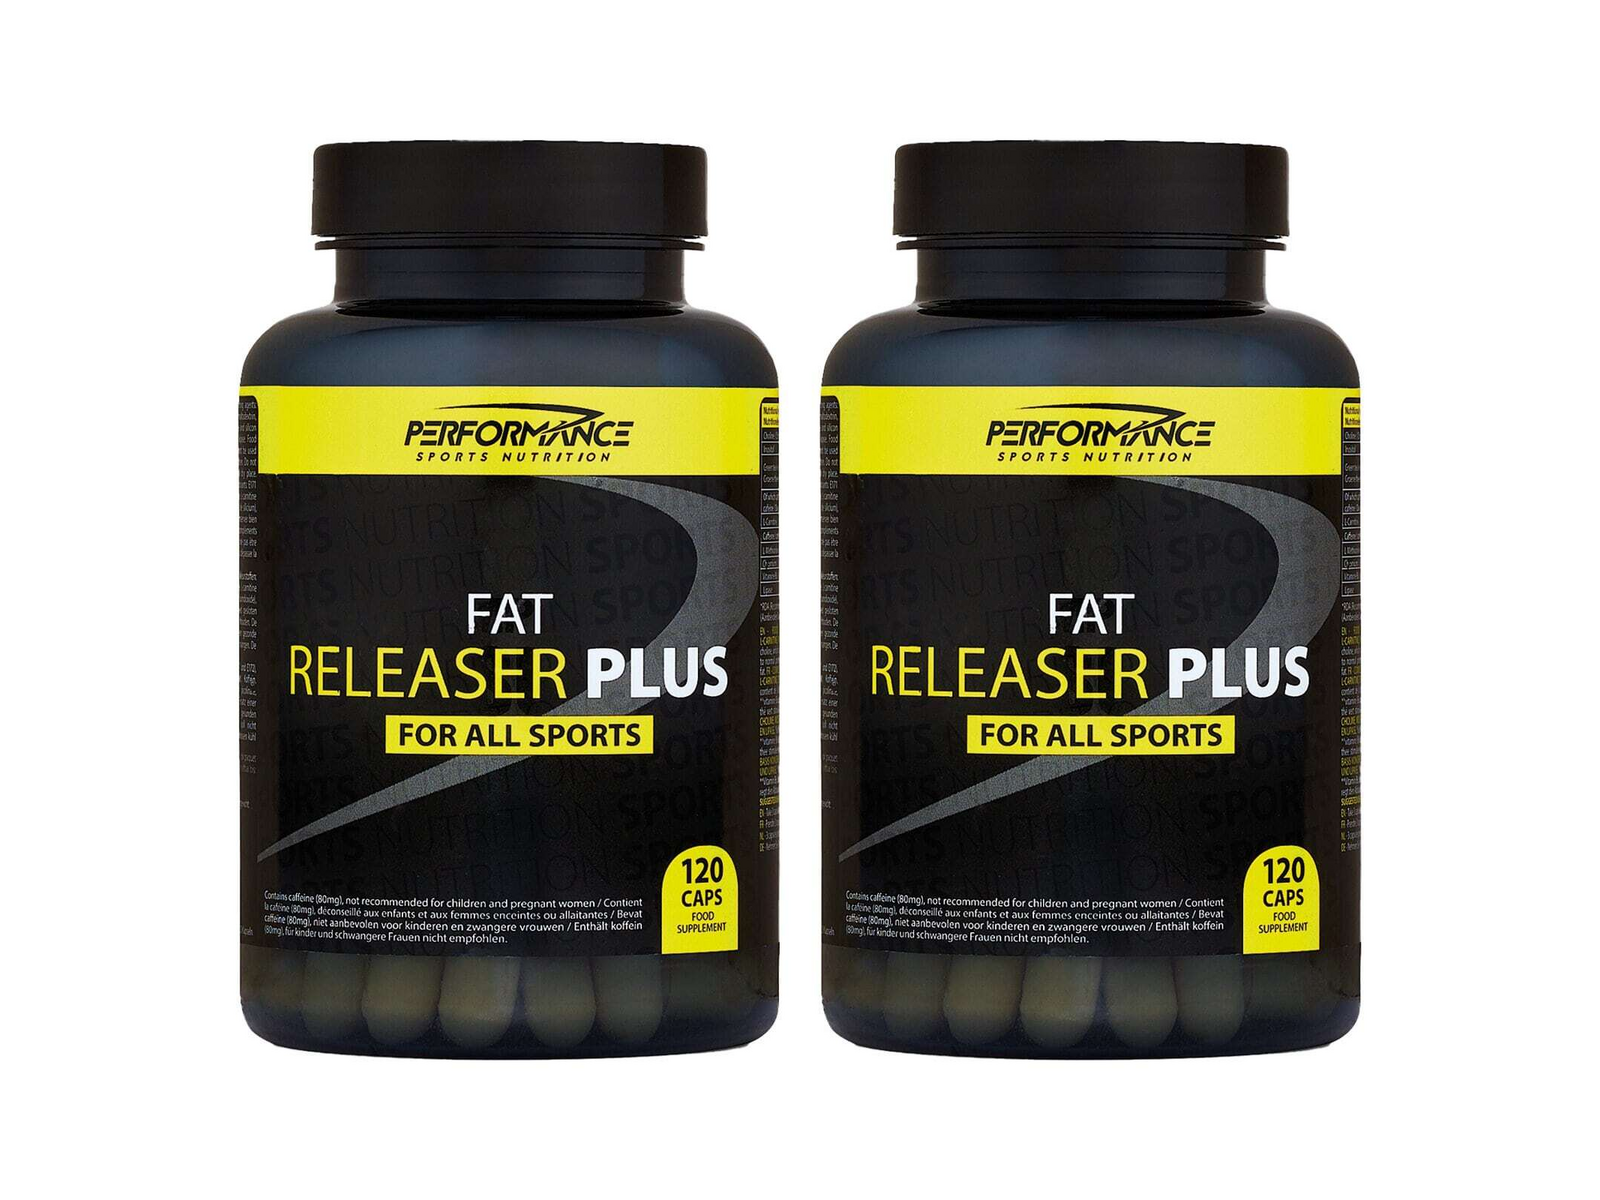 FAT RELEASER PLUS (120 tablets - 2-pack) - PERFORMANCE SPORTS NUTRITION